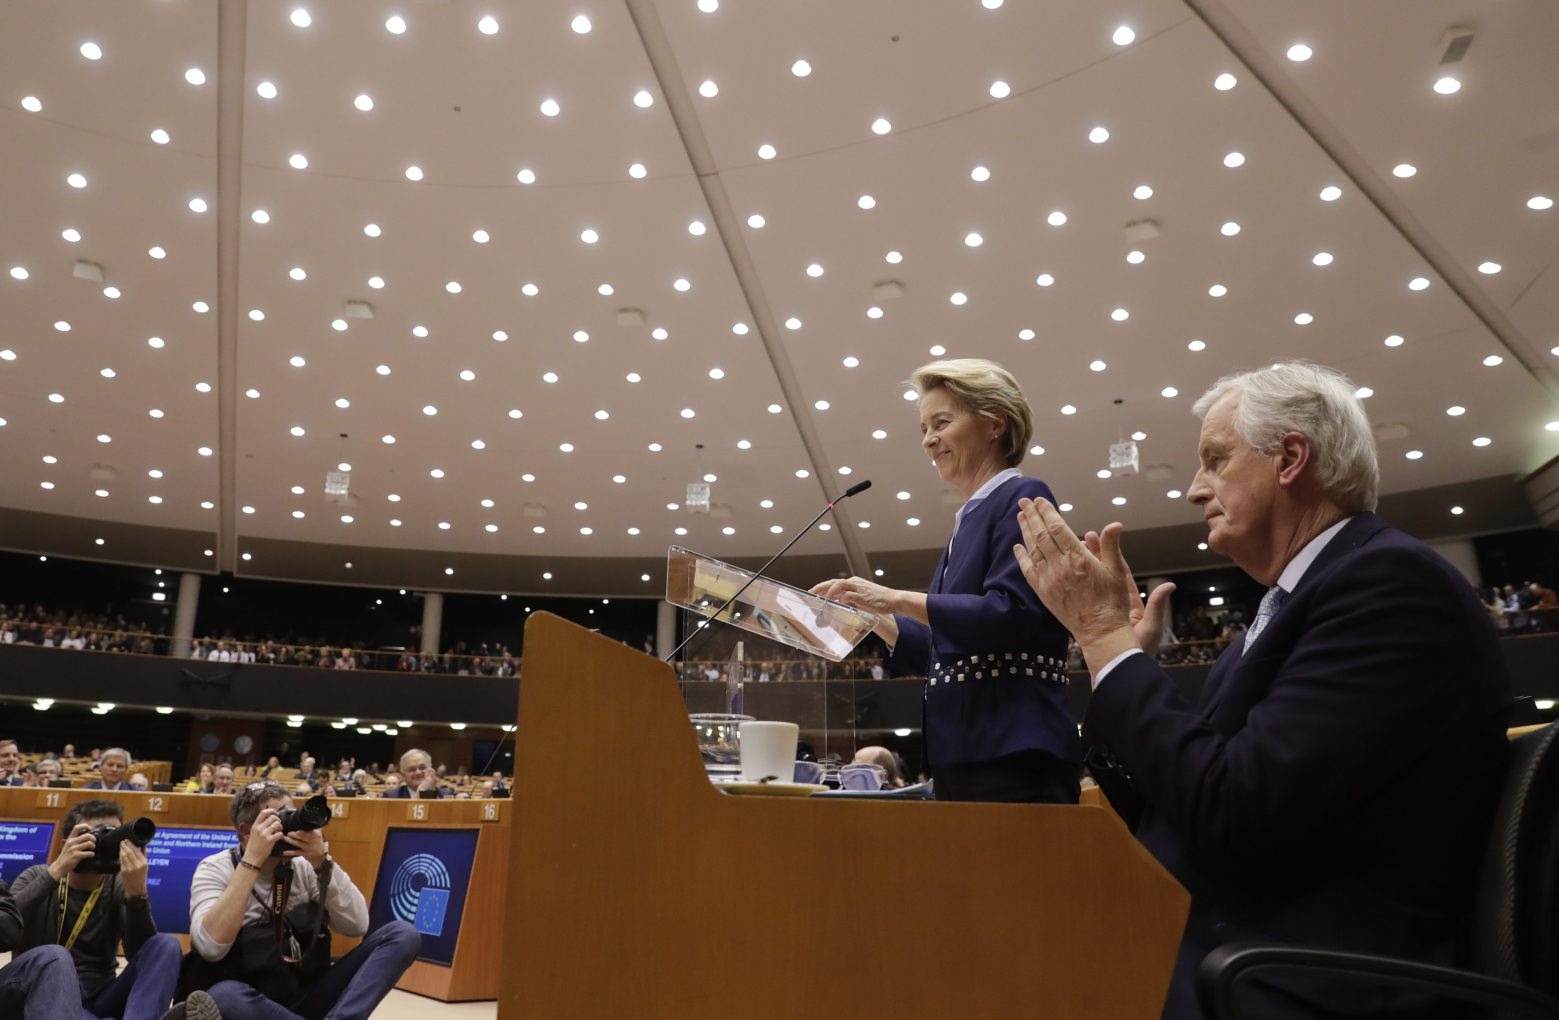 epa08176098 European Commission President Ursula Von Der Leyen (L) gives a speech during a plenary session on BREXIT vote of the European Parliament in Brussels, Belgium, 29 January 2020. Britain's withdrawal from the EU is set for midnight CET on 31 January 2020, with the European Parliament scheduled to vote on the Brexit Withdrawal Agreement.  EPA/OLIVIER HOSLET BELGIUM EU PARLIAMENT PLENARY SESSION BREXIT